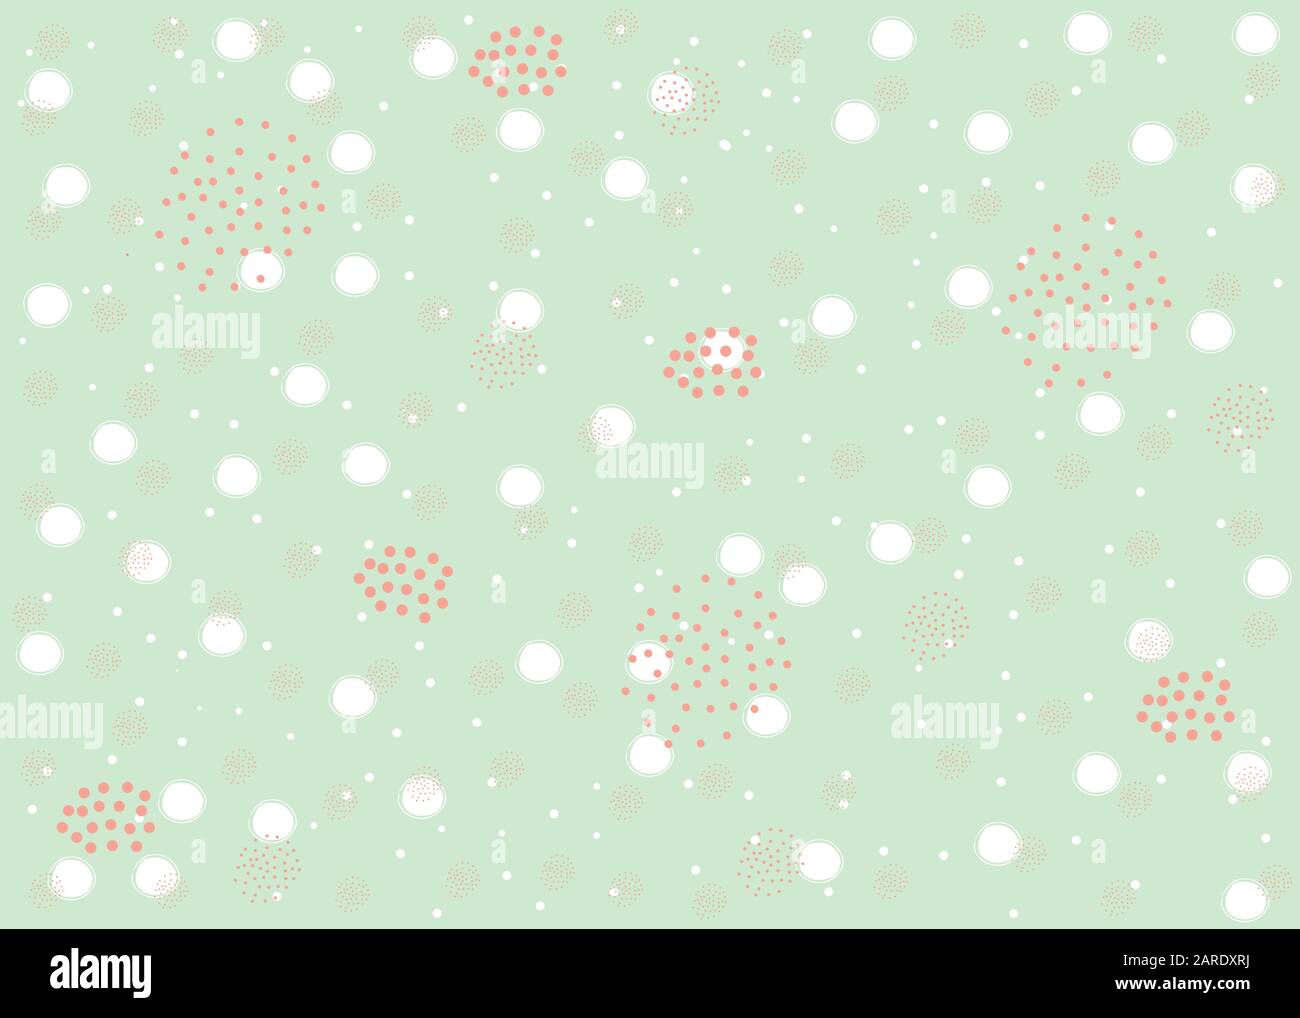 Seamless pattern with grouped dots. Great for wrapping, textiles, fabric, swatches, backdrops, templates, etc. Vector Illustration Stock Vector